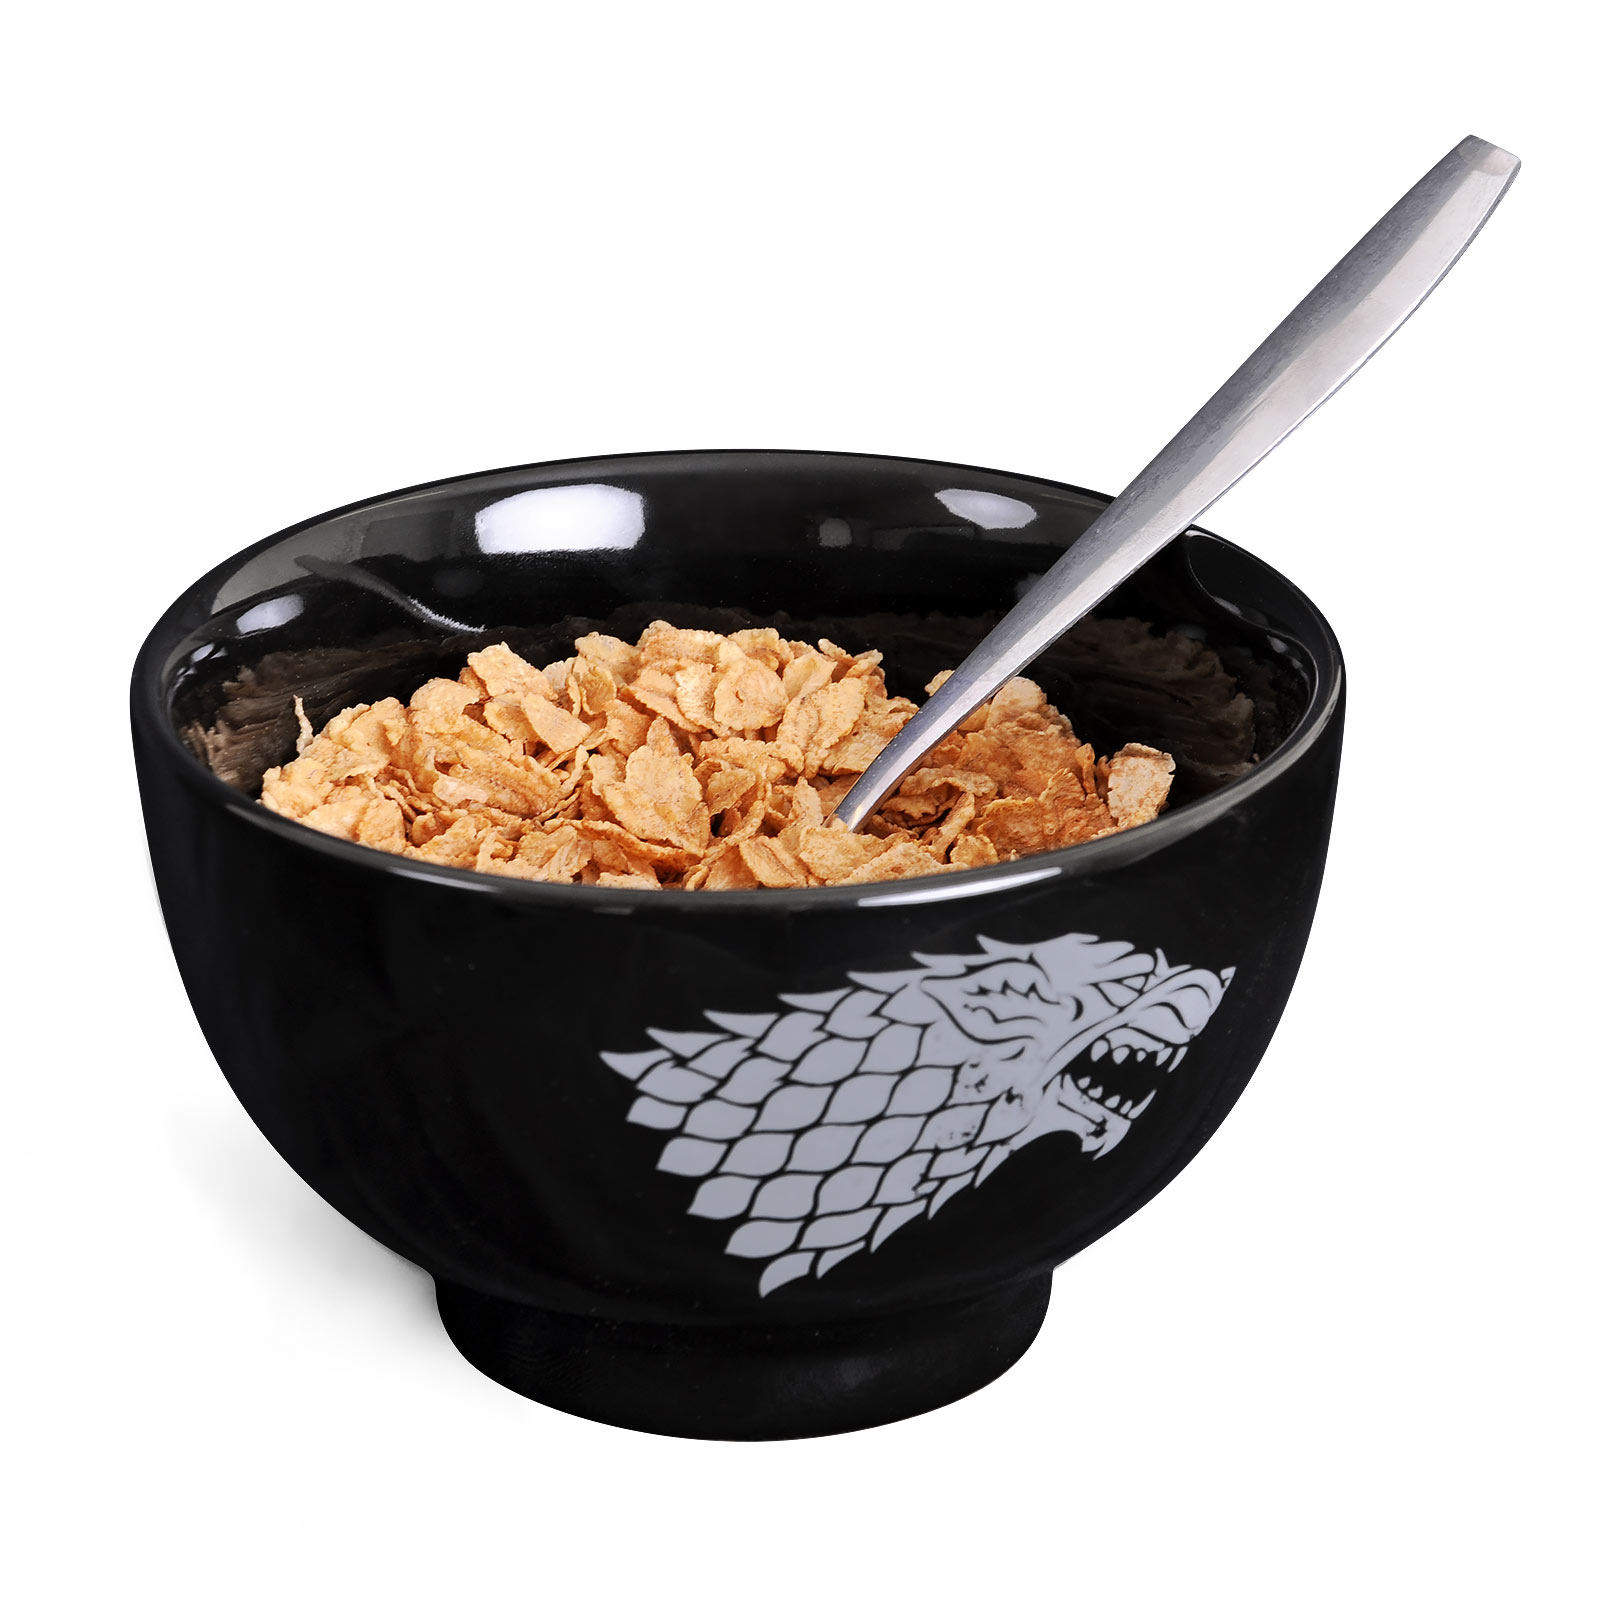 Game of Thrones - House Stark Cereal Bowl Black